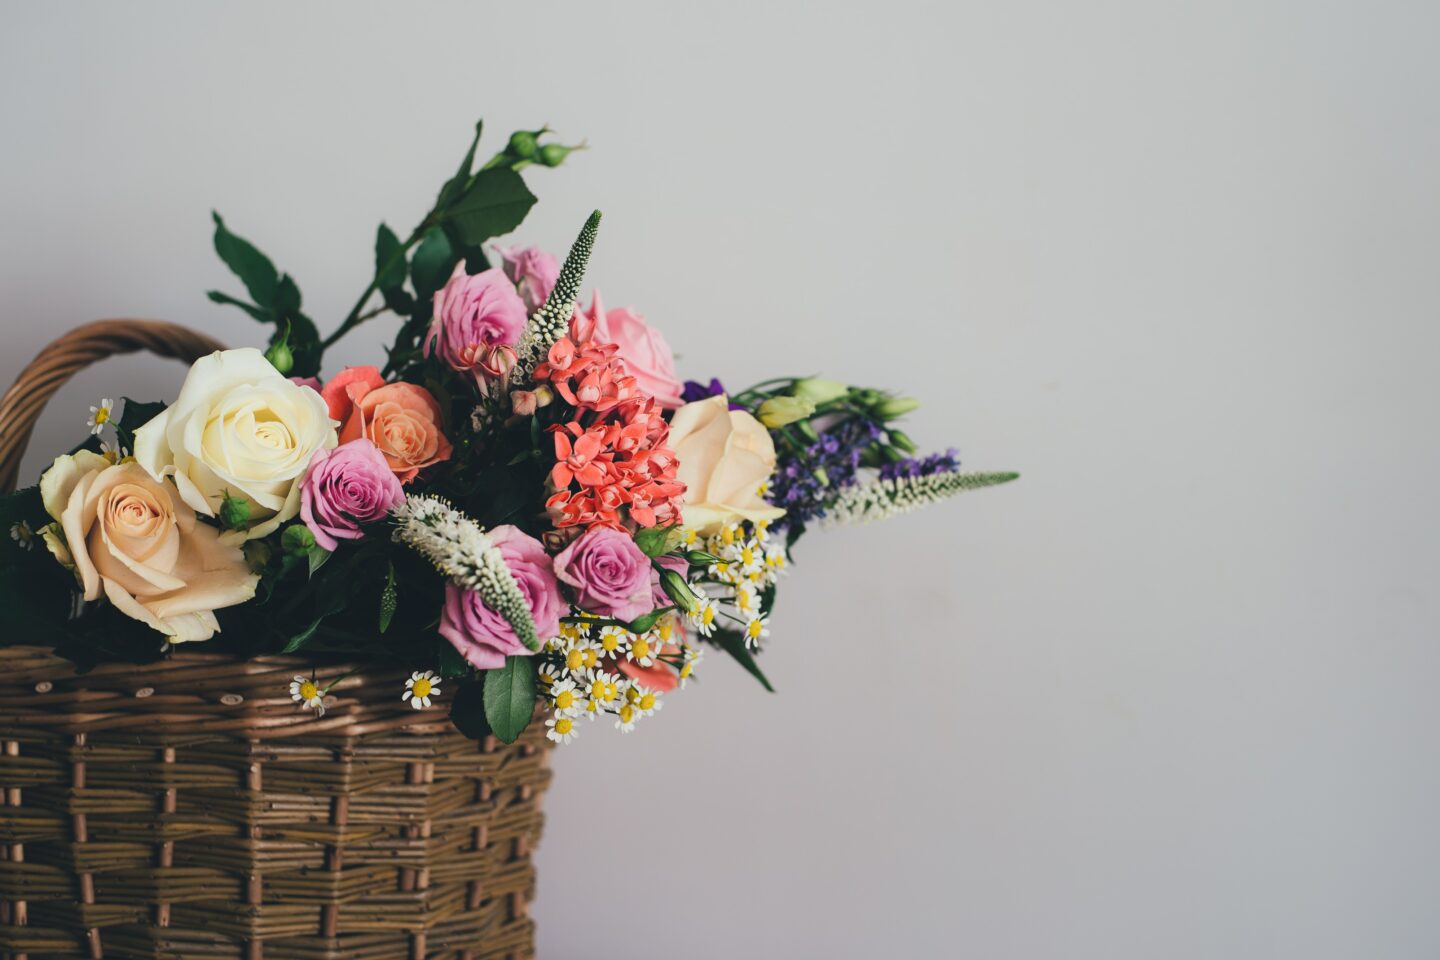 Fresh Cut Flower Subscription from Brantwood Farms